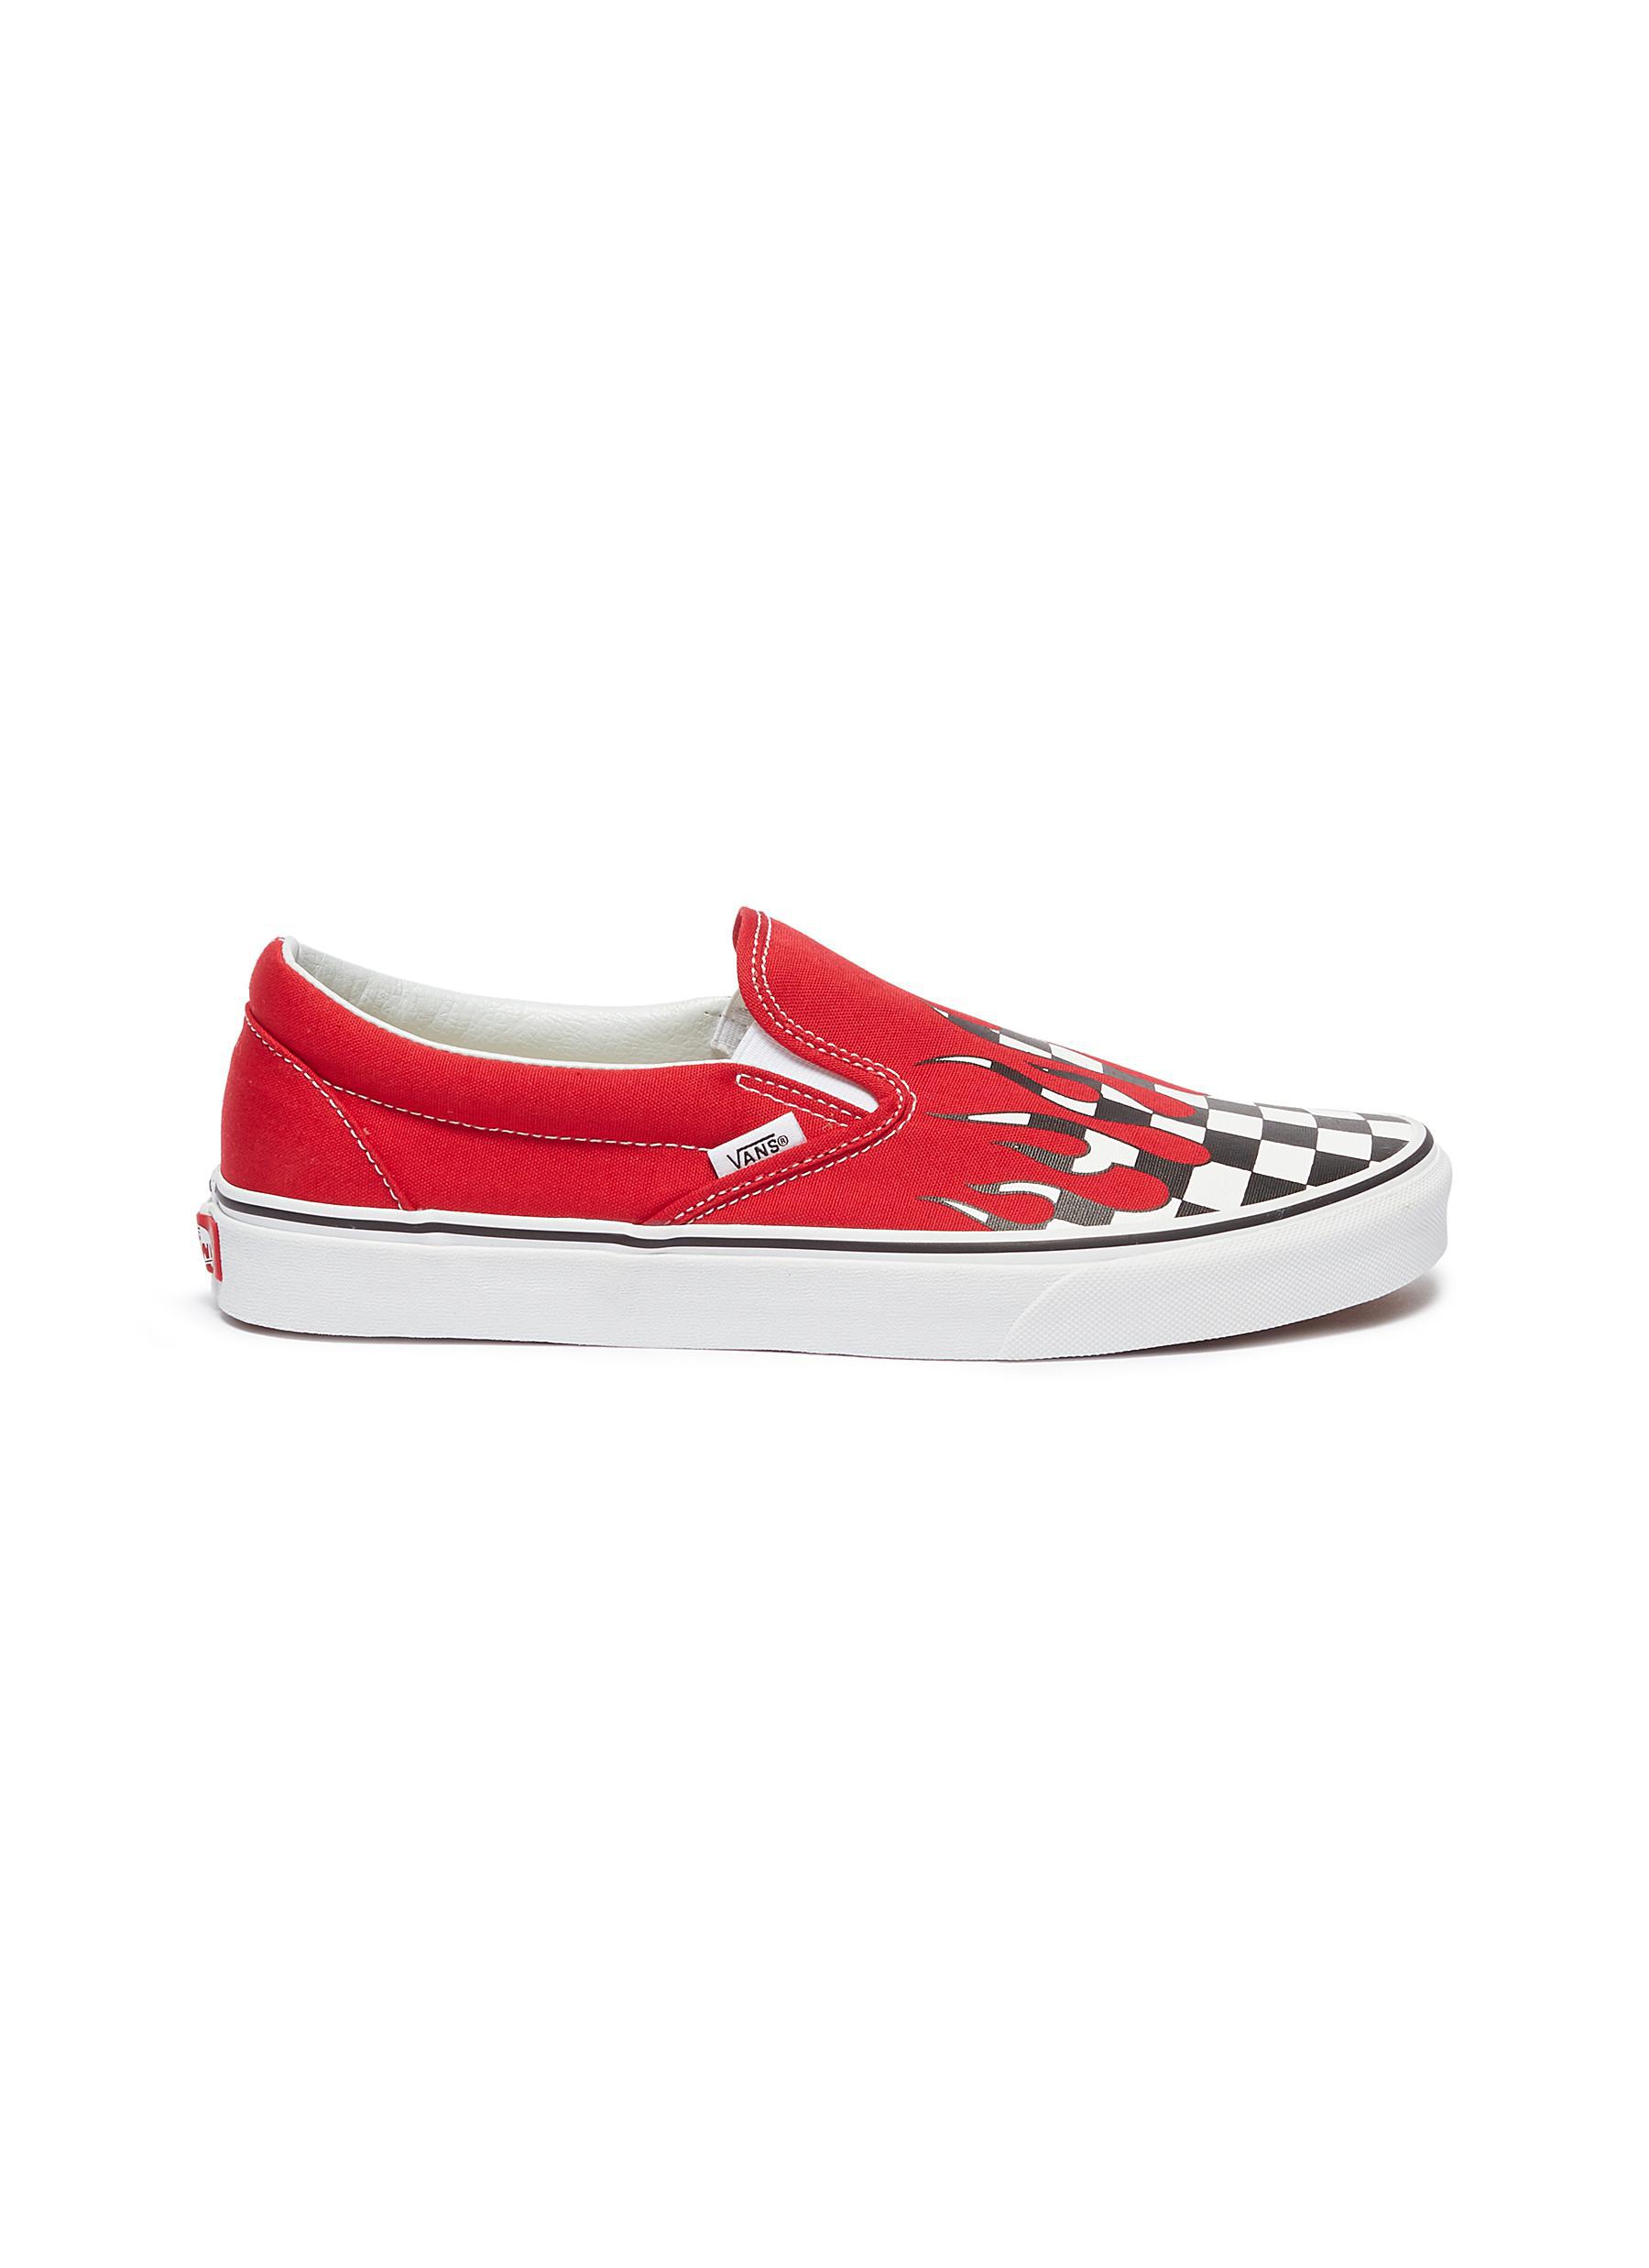 Vans 'classic Slip-on' Checkerboard Flame Canvas Skates in Red for Men